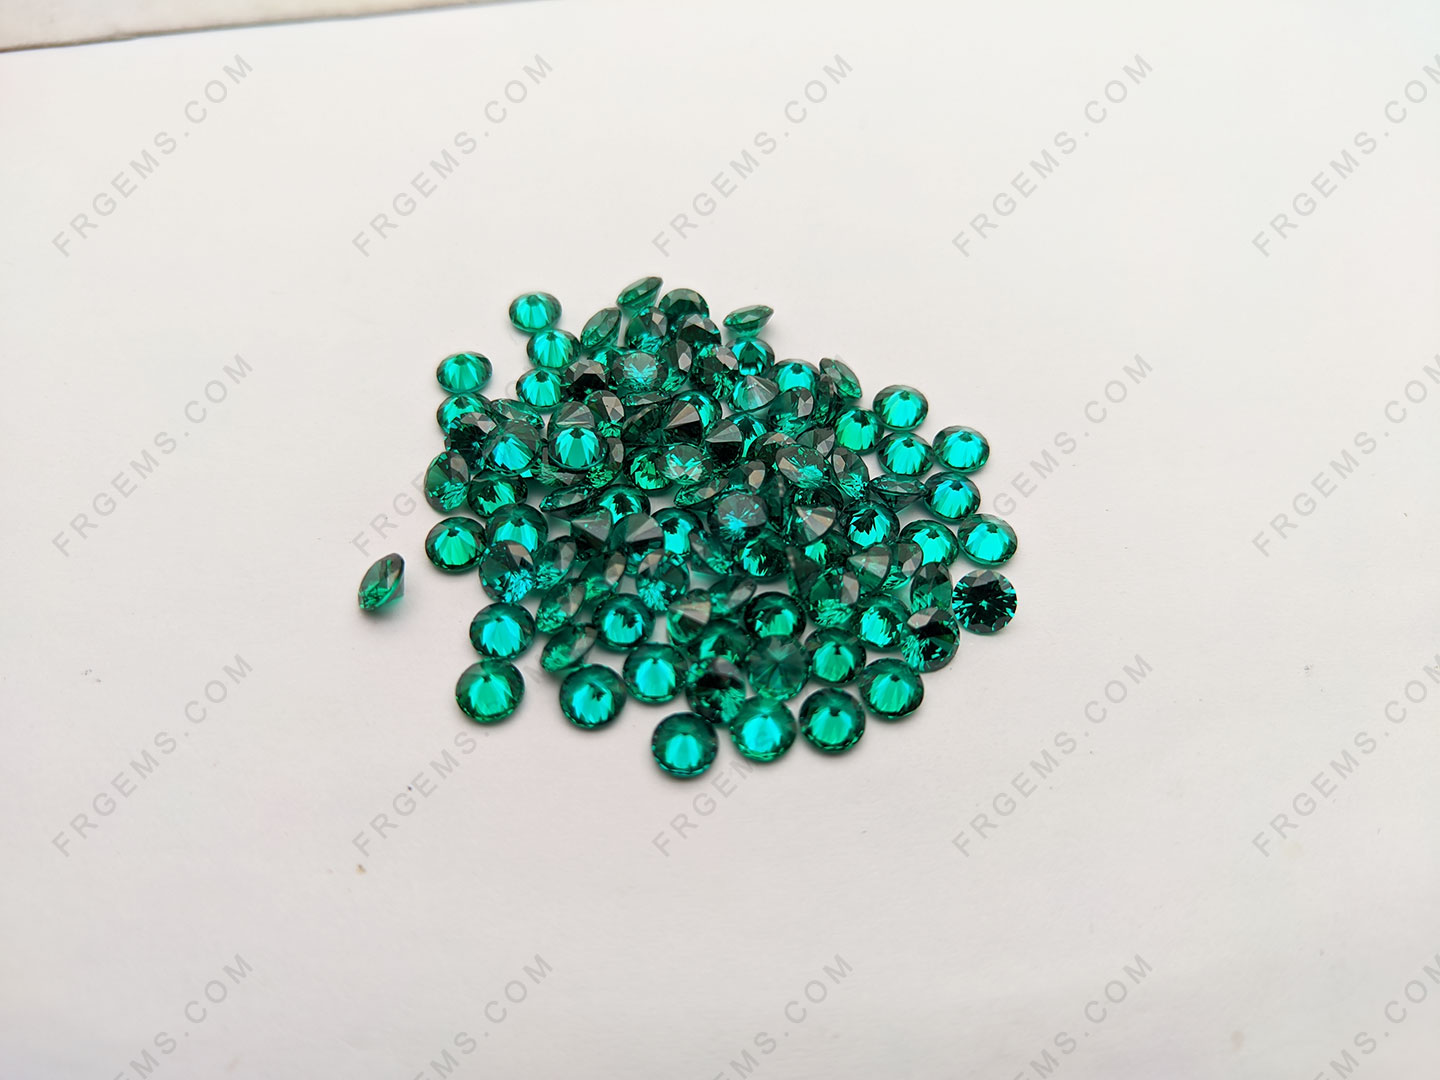 Cubic Zirconia CZ Teal Color Round Shaped Faceted cut 6mm gemstones wholesale